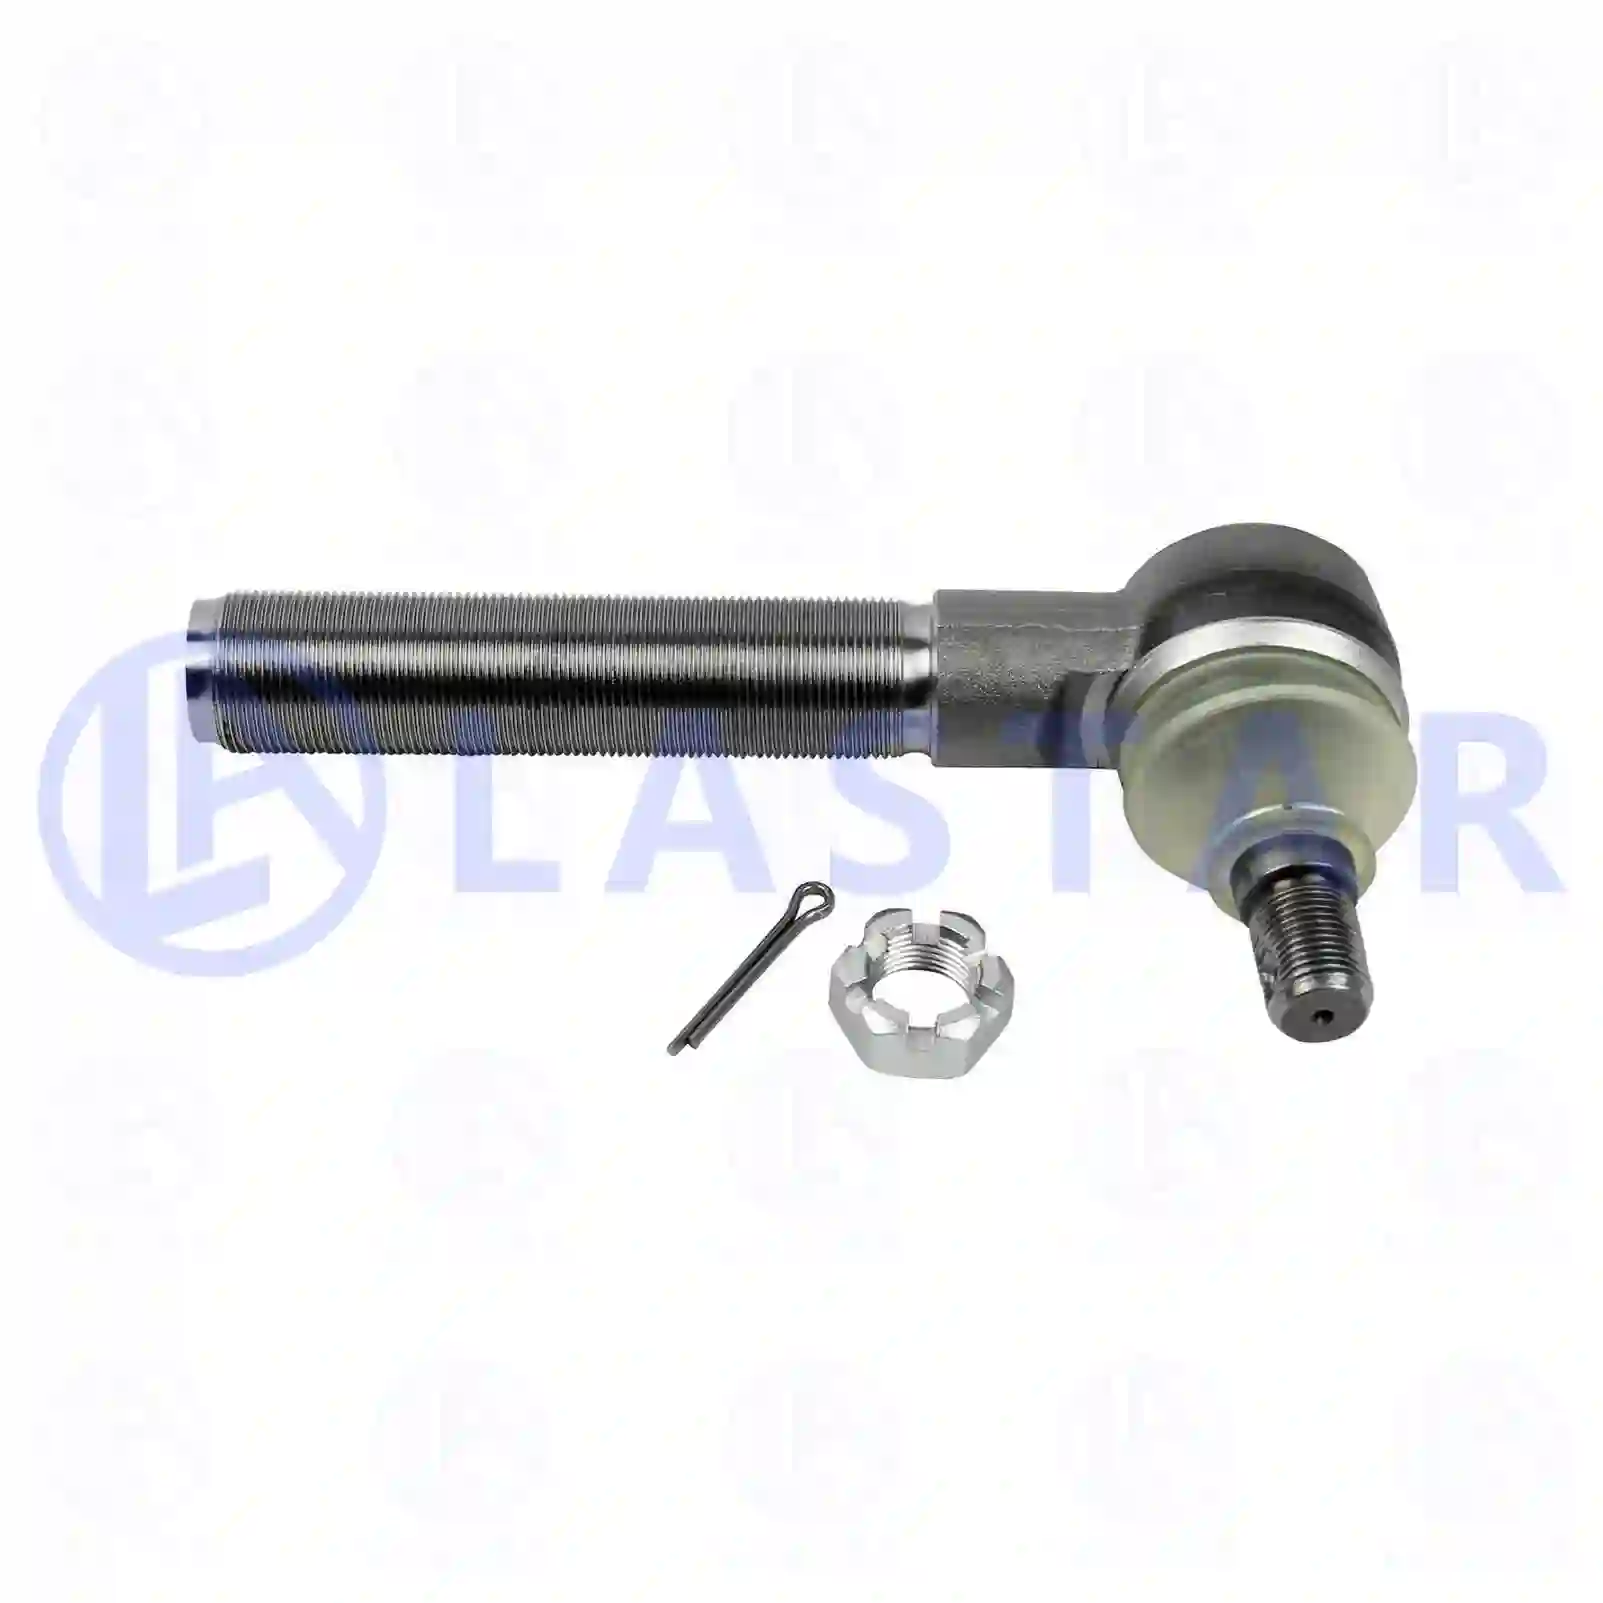 Ball joint, right hand thread, 77705607, ACU9240, ZG40396-0008, , , ||  77705607 Lastar Spare Part | Truck Spare Parts, Auotomotive Spare Parts Ball joint, right hand thread, 77705607, ACU9240, ZG40396-0008, , , ||  77705607 Lastar Spare Part | Truck Spare Parts, Auotomotive Spare Parts